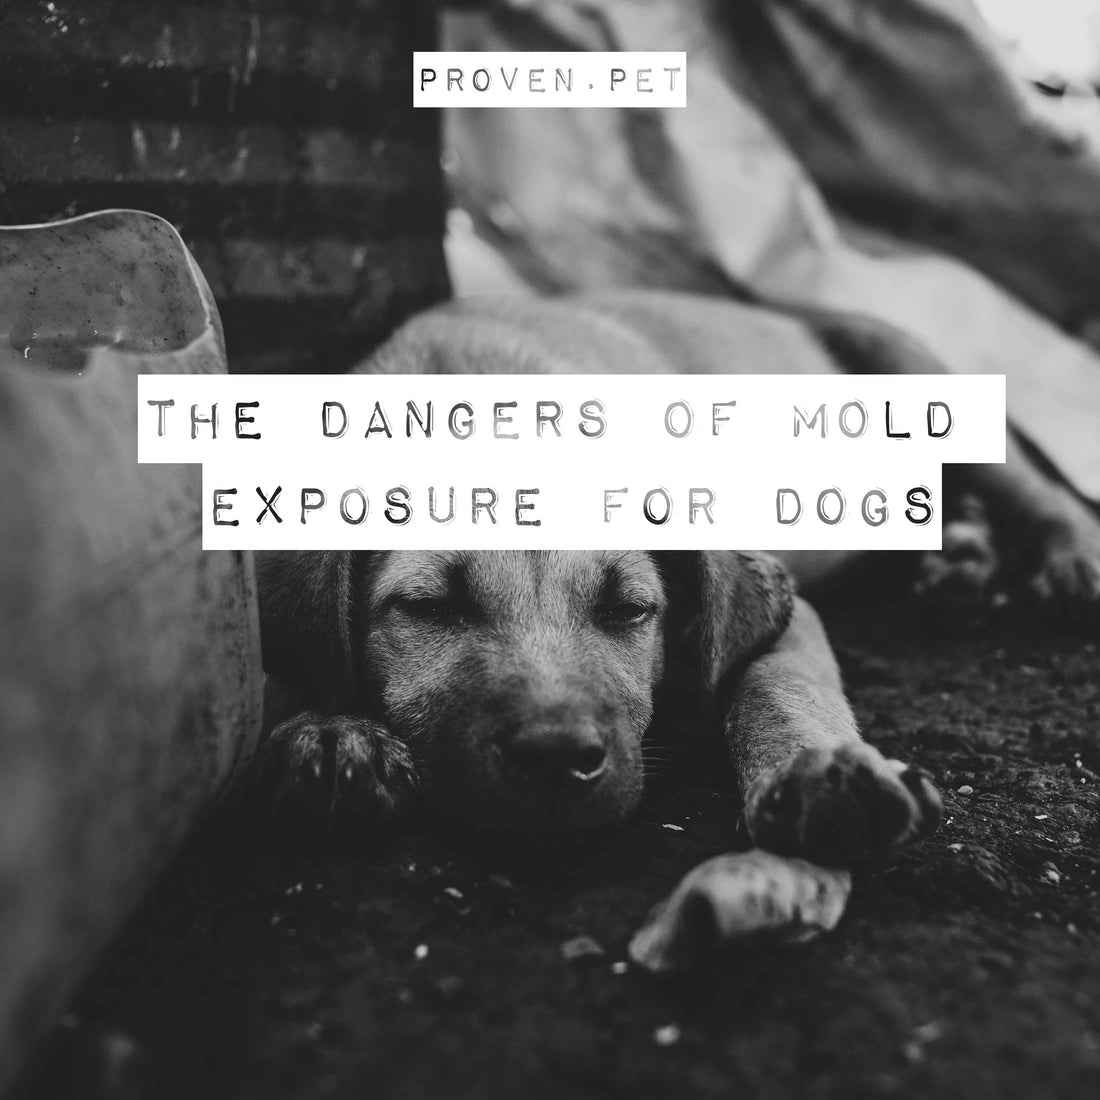 The Dangers of Mold Exposure for Dogs